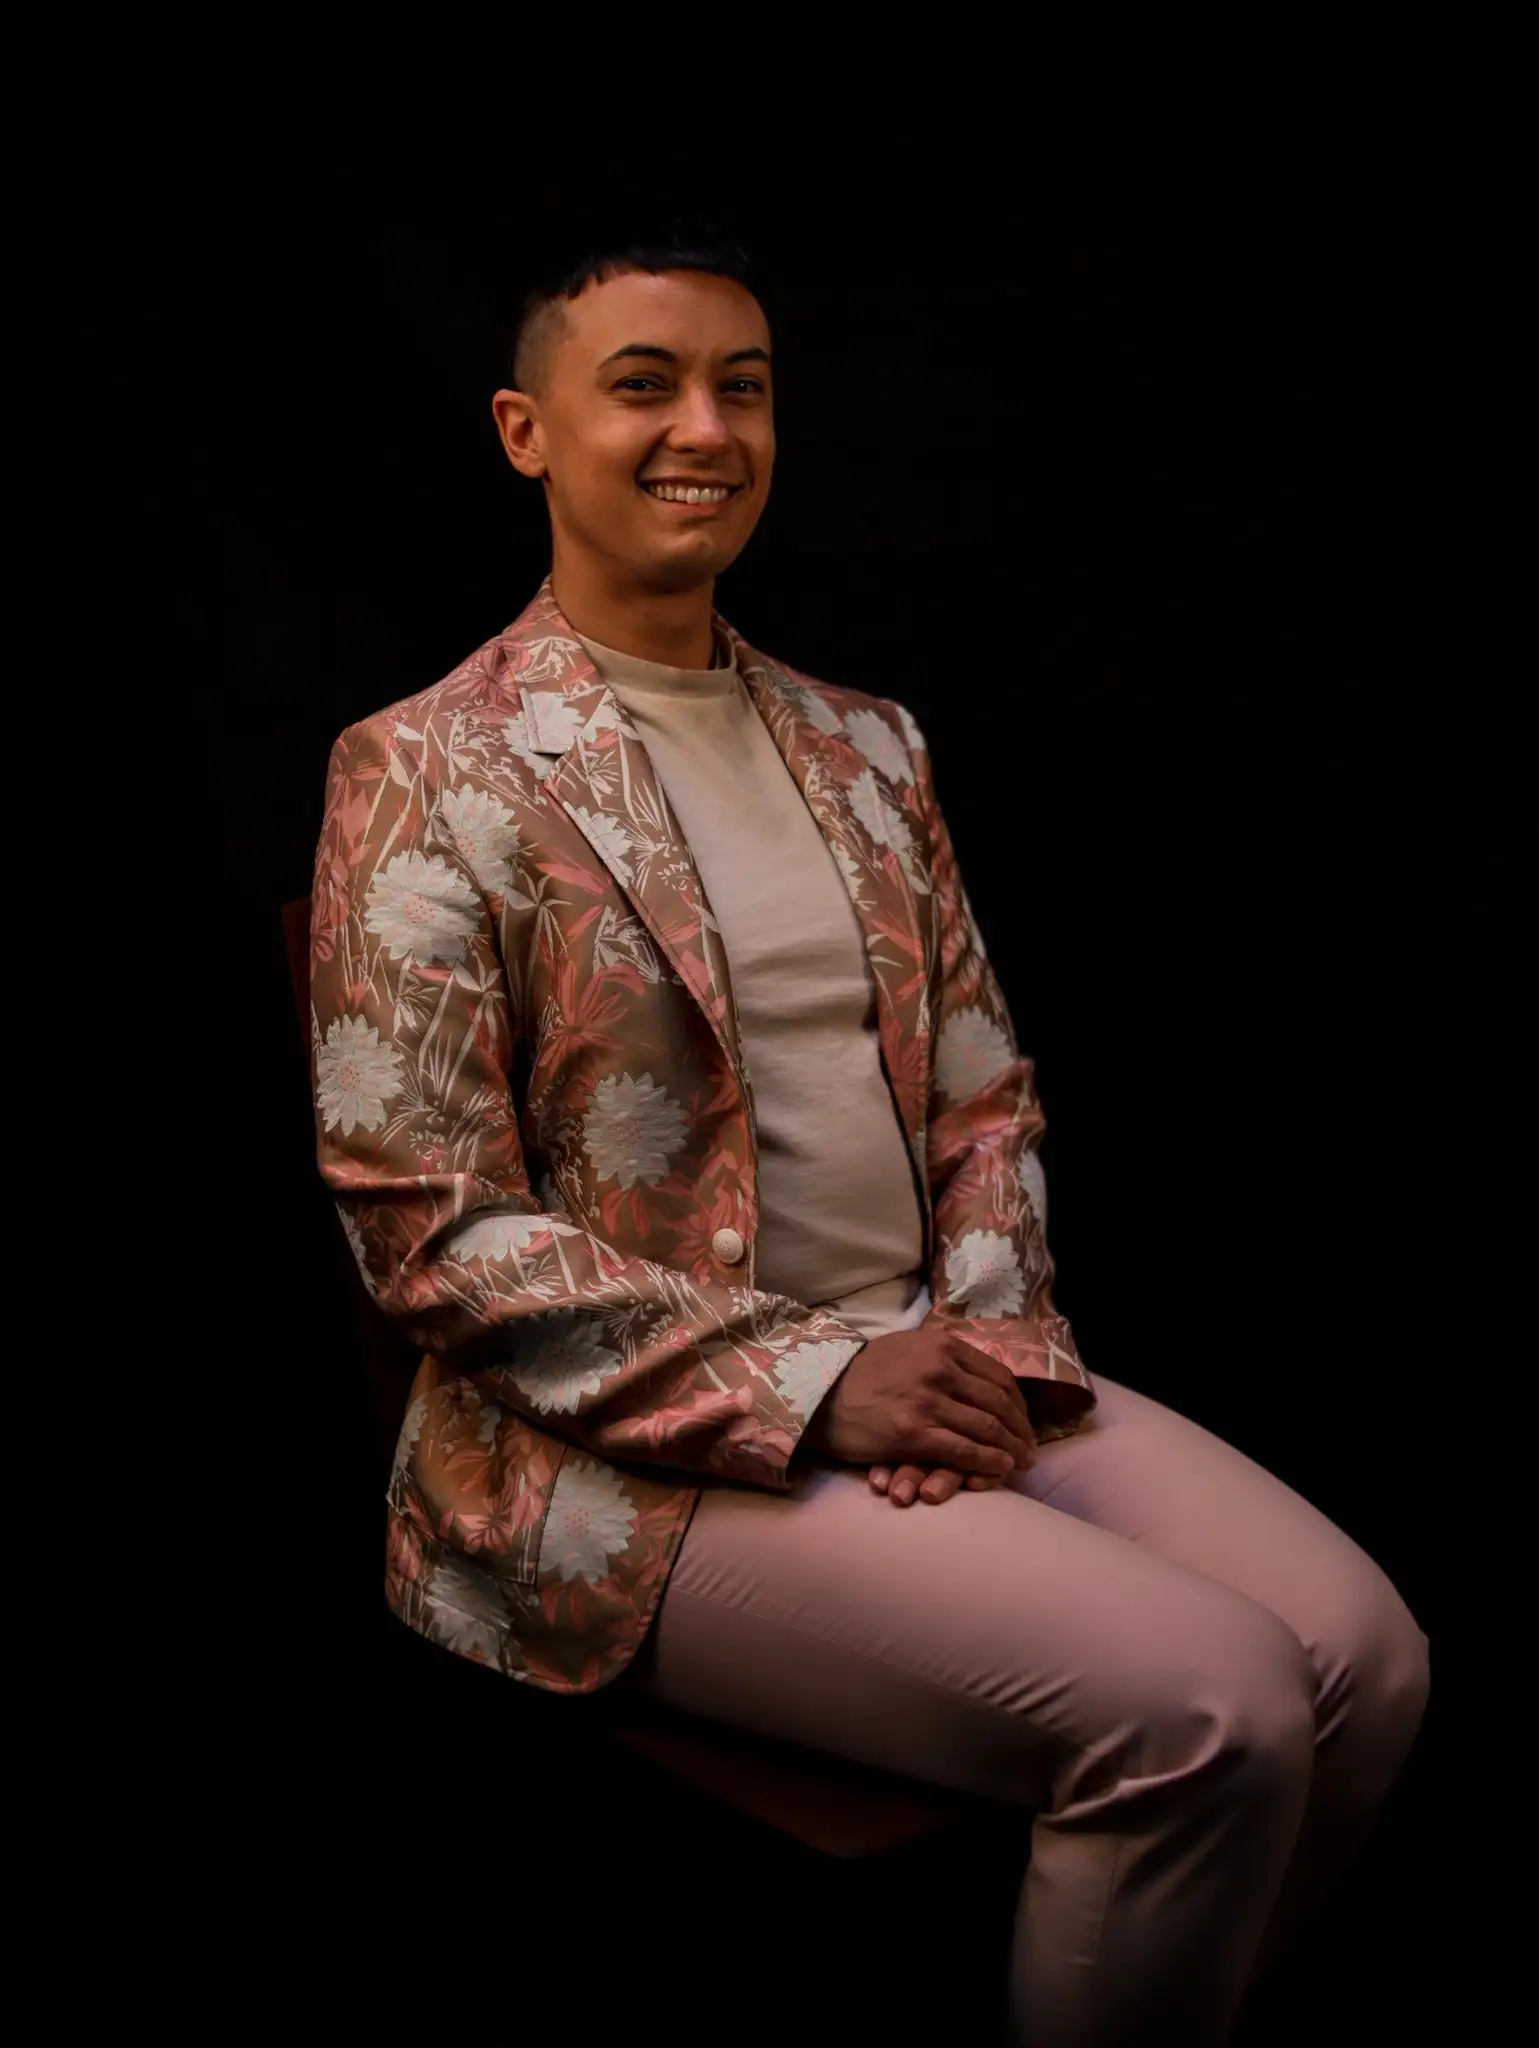 Mel sits in front of a black background in pink pants and a pink and beige floral lamé blazer. They are a white, trans web designer and the owner of The Happy Sites. 